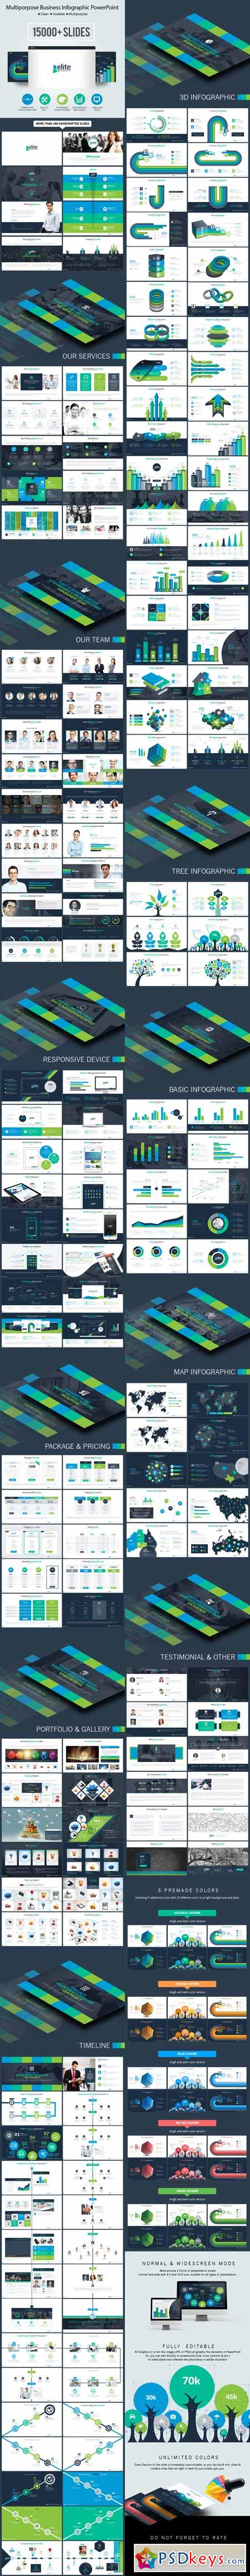 Multipurpose Business Infographic PowerPoint 10571240